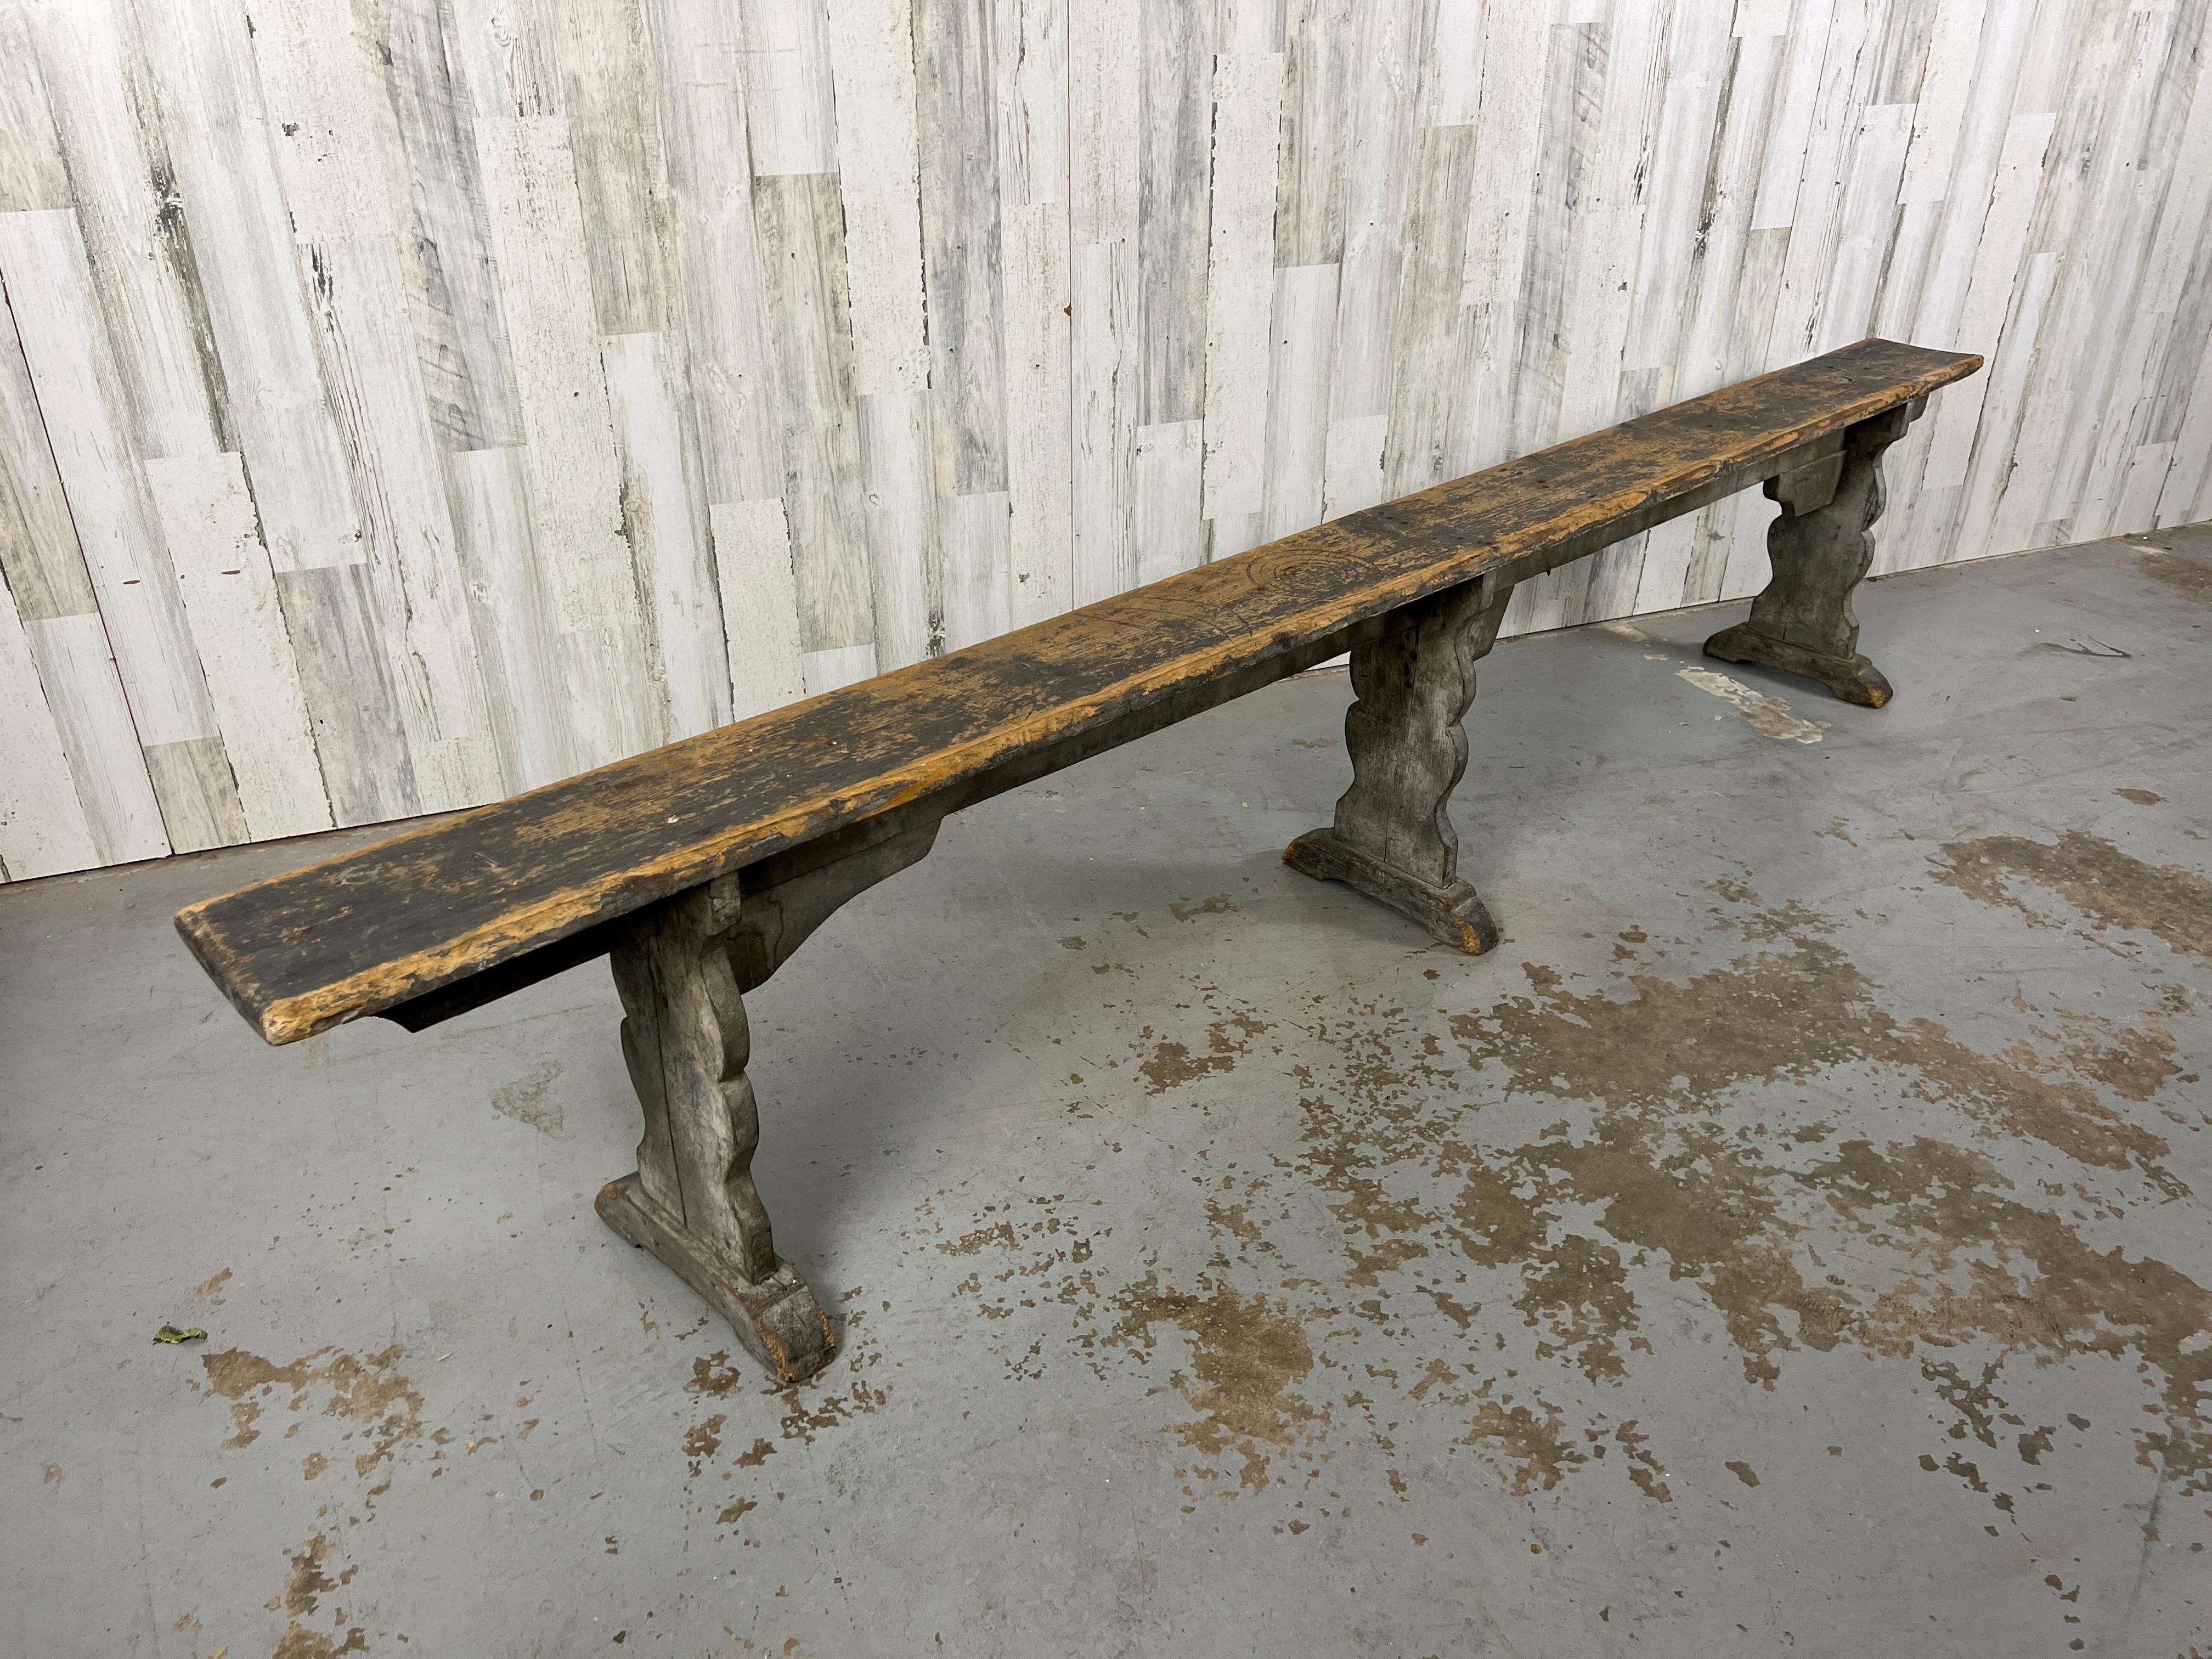 Rustic country bench made of pine with worn grey painted finish. Very sturdy can be used as seating or used to display for pottery and plants.